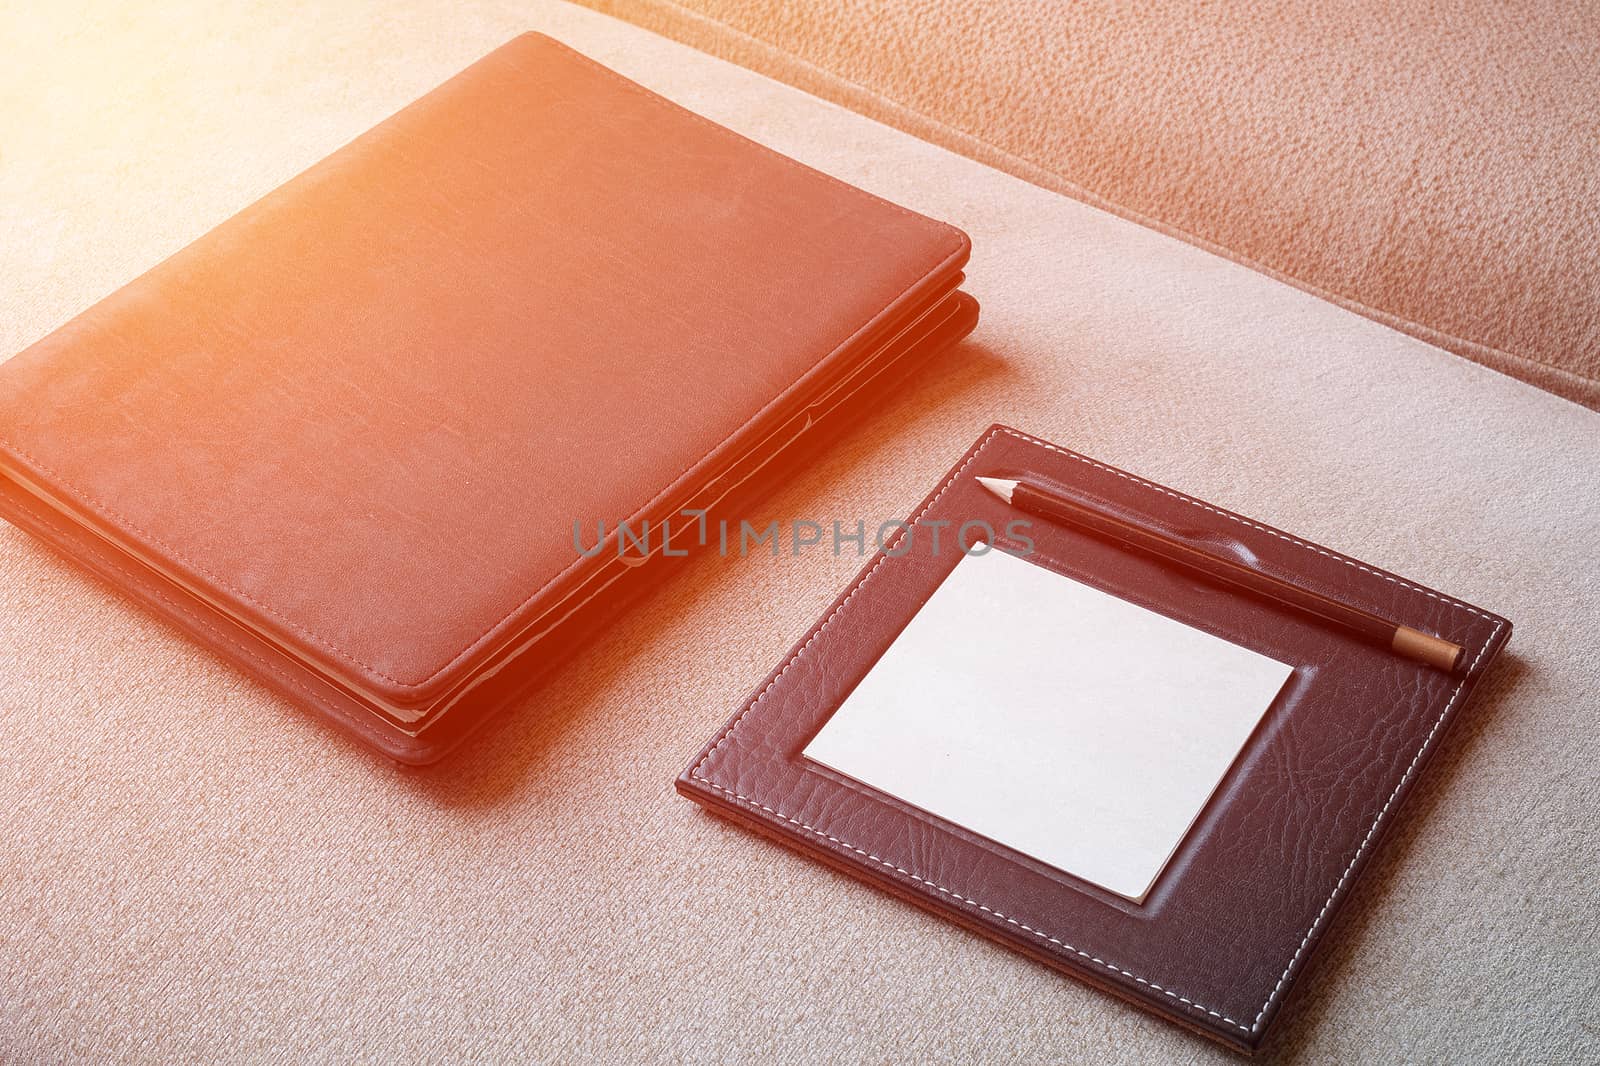 Black leather note book with pencil on carpet background